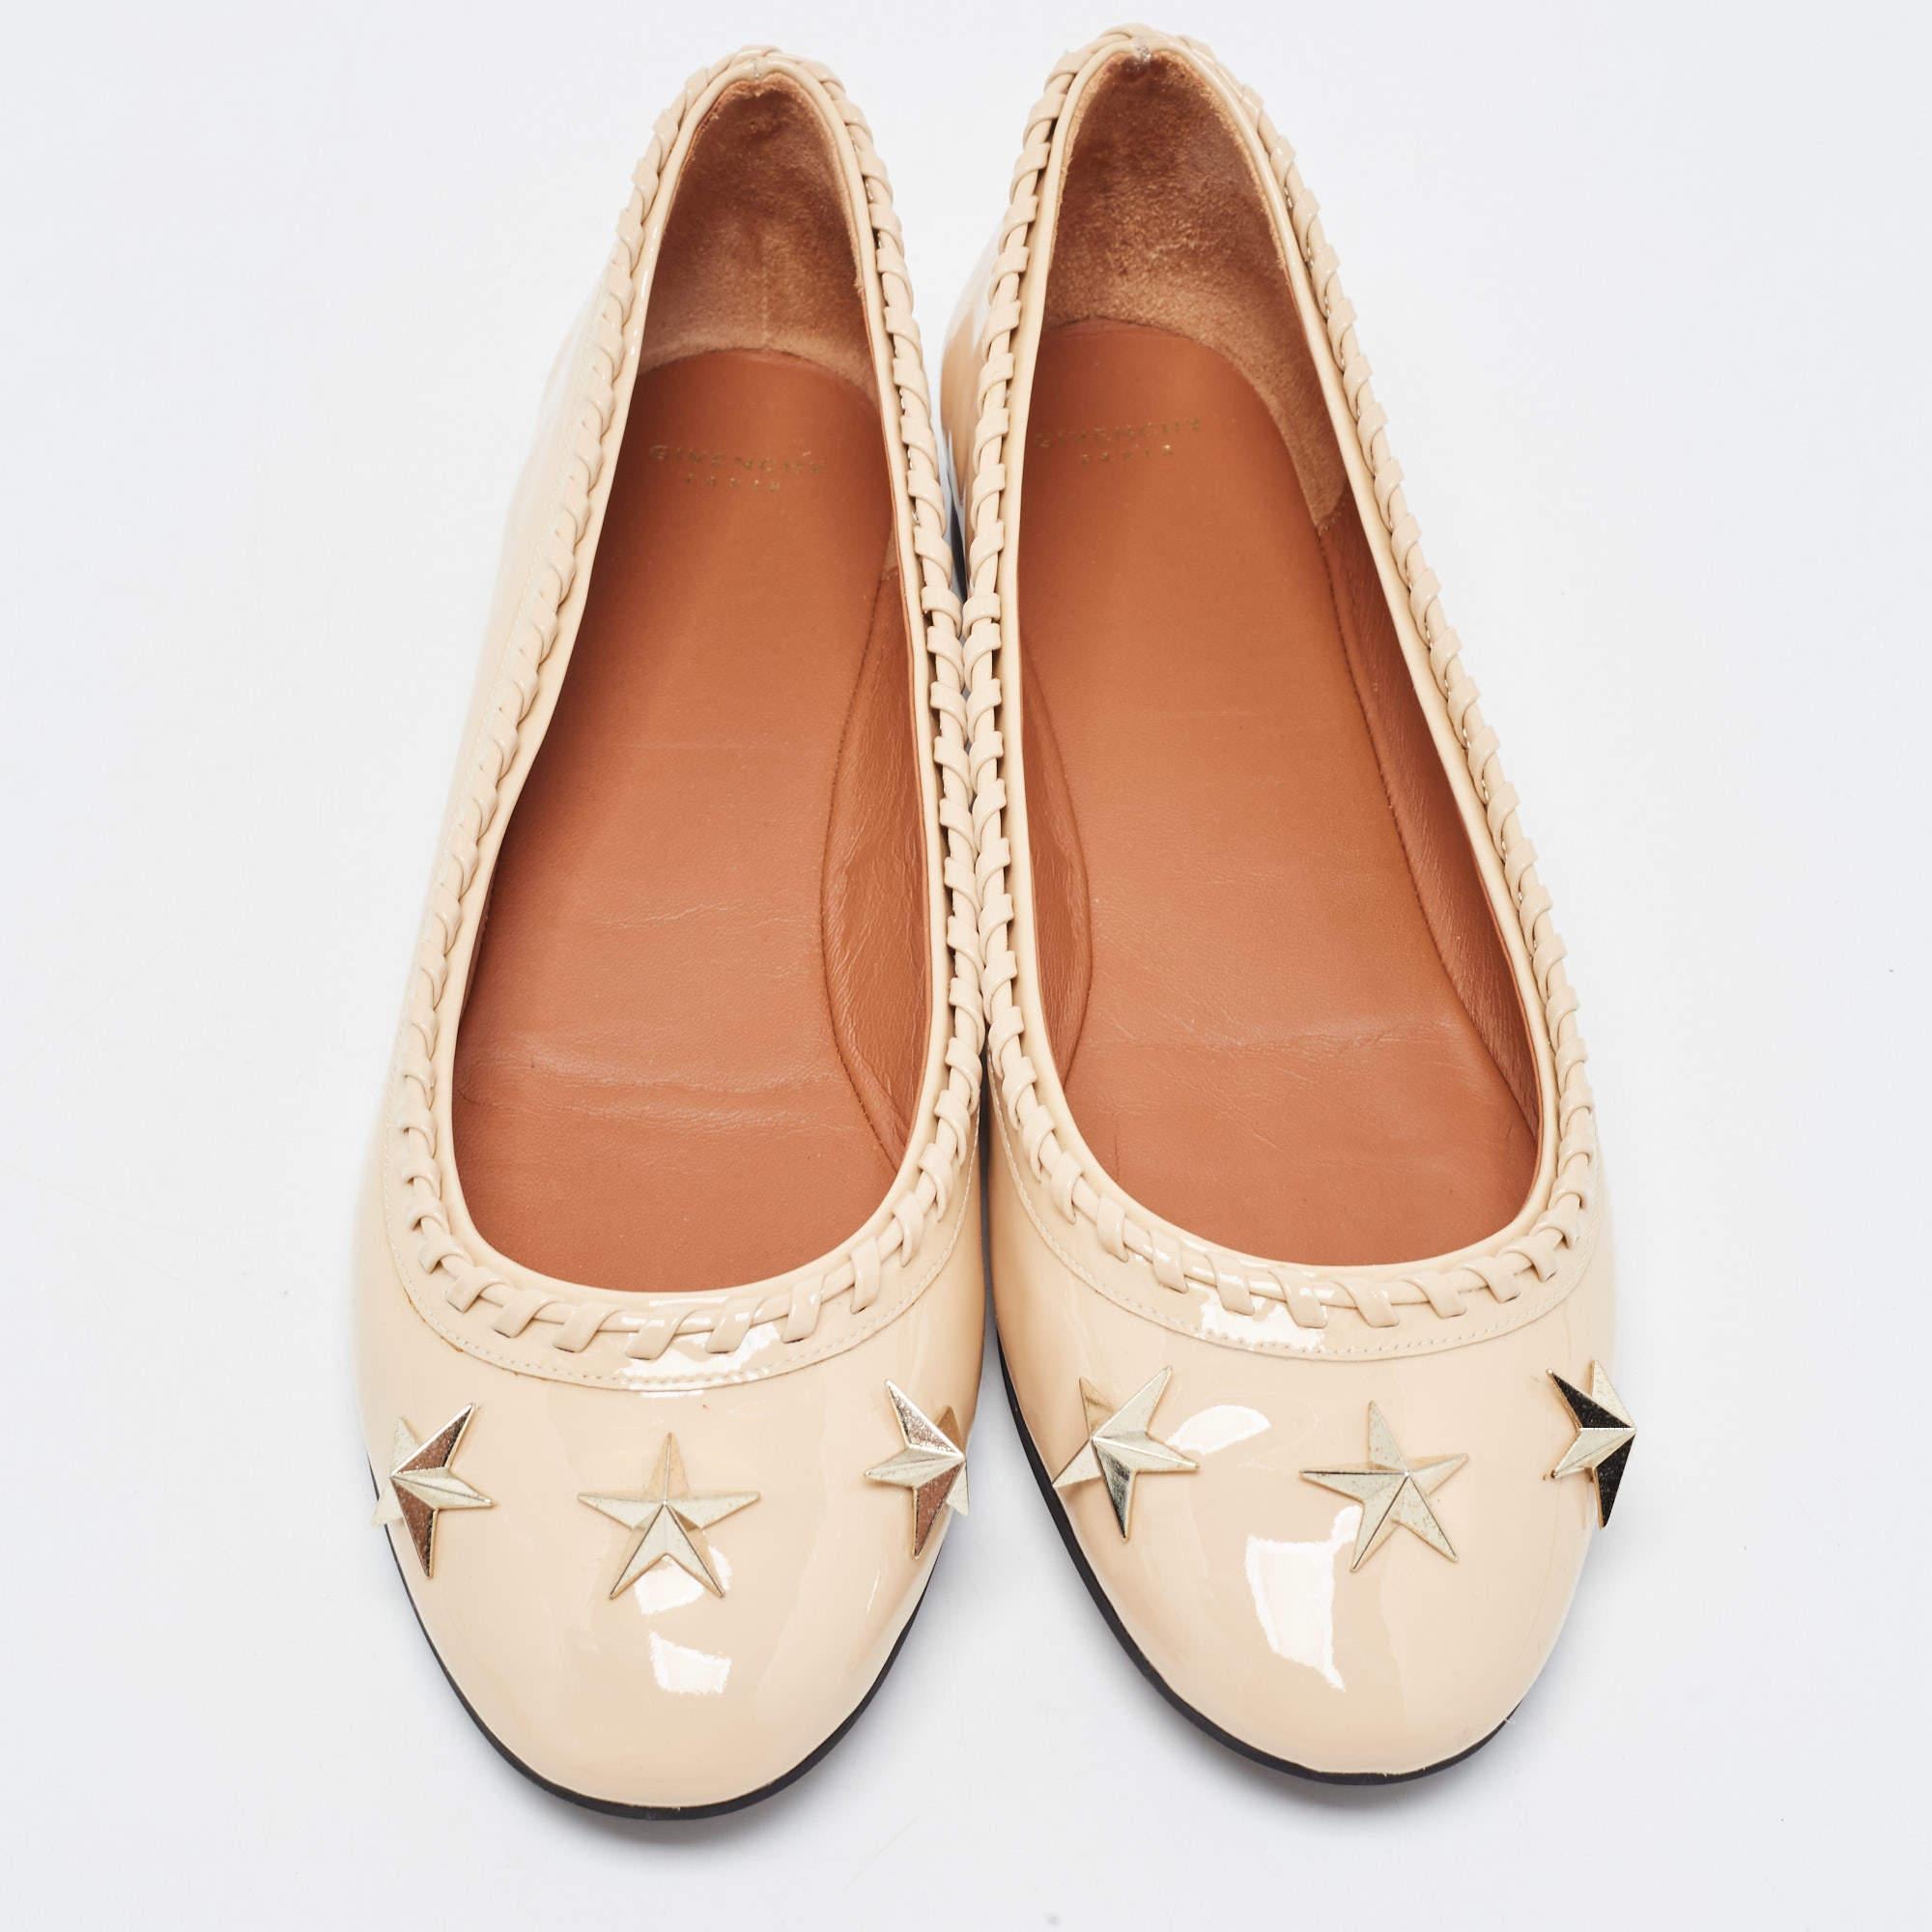 Complete your look by adding these Givenchy ballet flats to your lovely wardrobe. They are crafted skilfully to grant the perfect fit and style.

Includes: Info Booklet, Original Box

